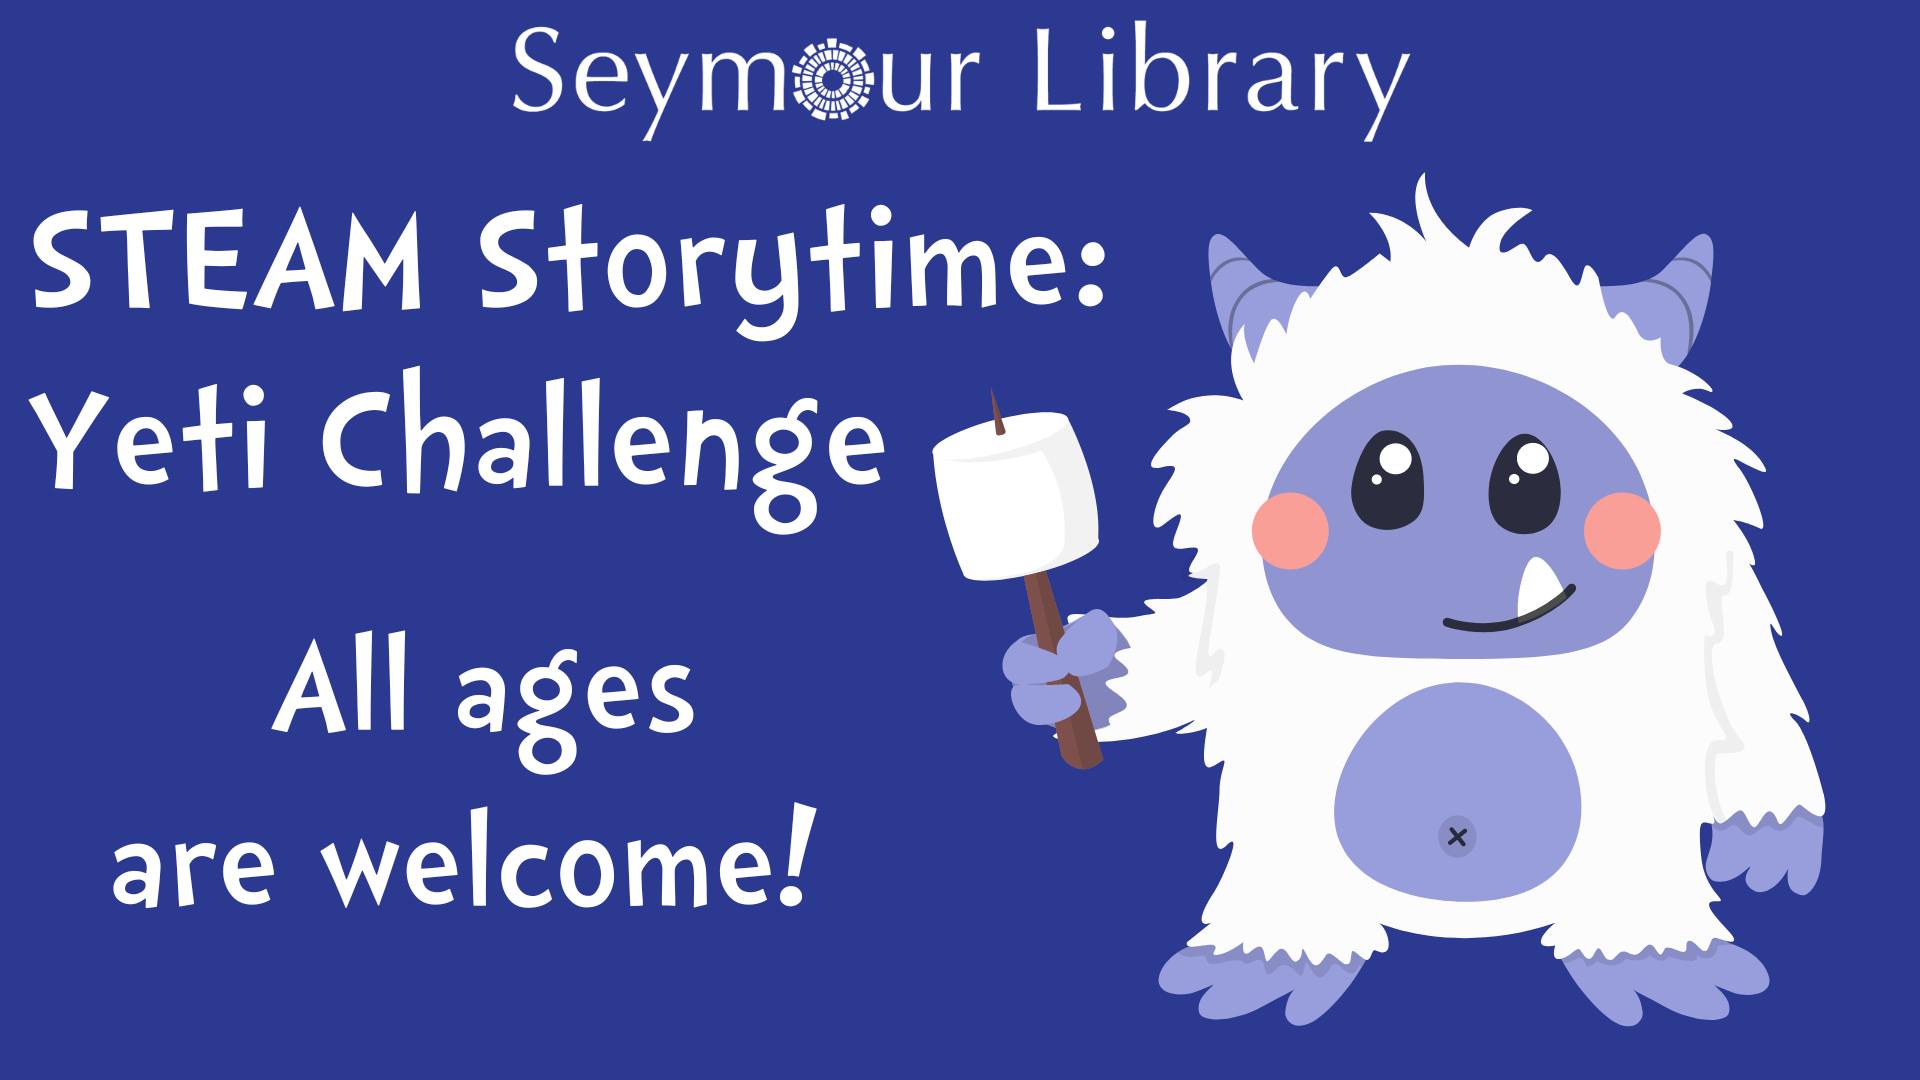 STEAM Storytime -- Yeti Challenge. Stylized illustration of a Yeti with a marshmallow.